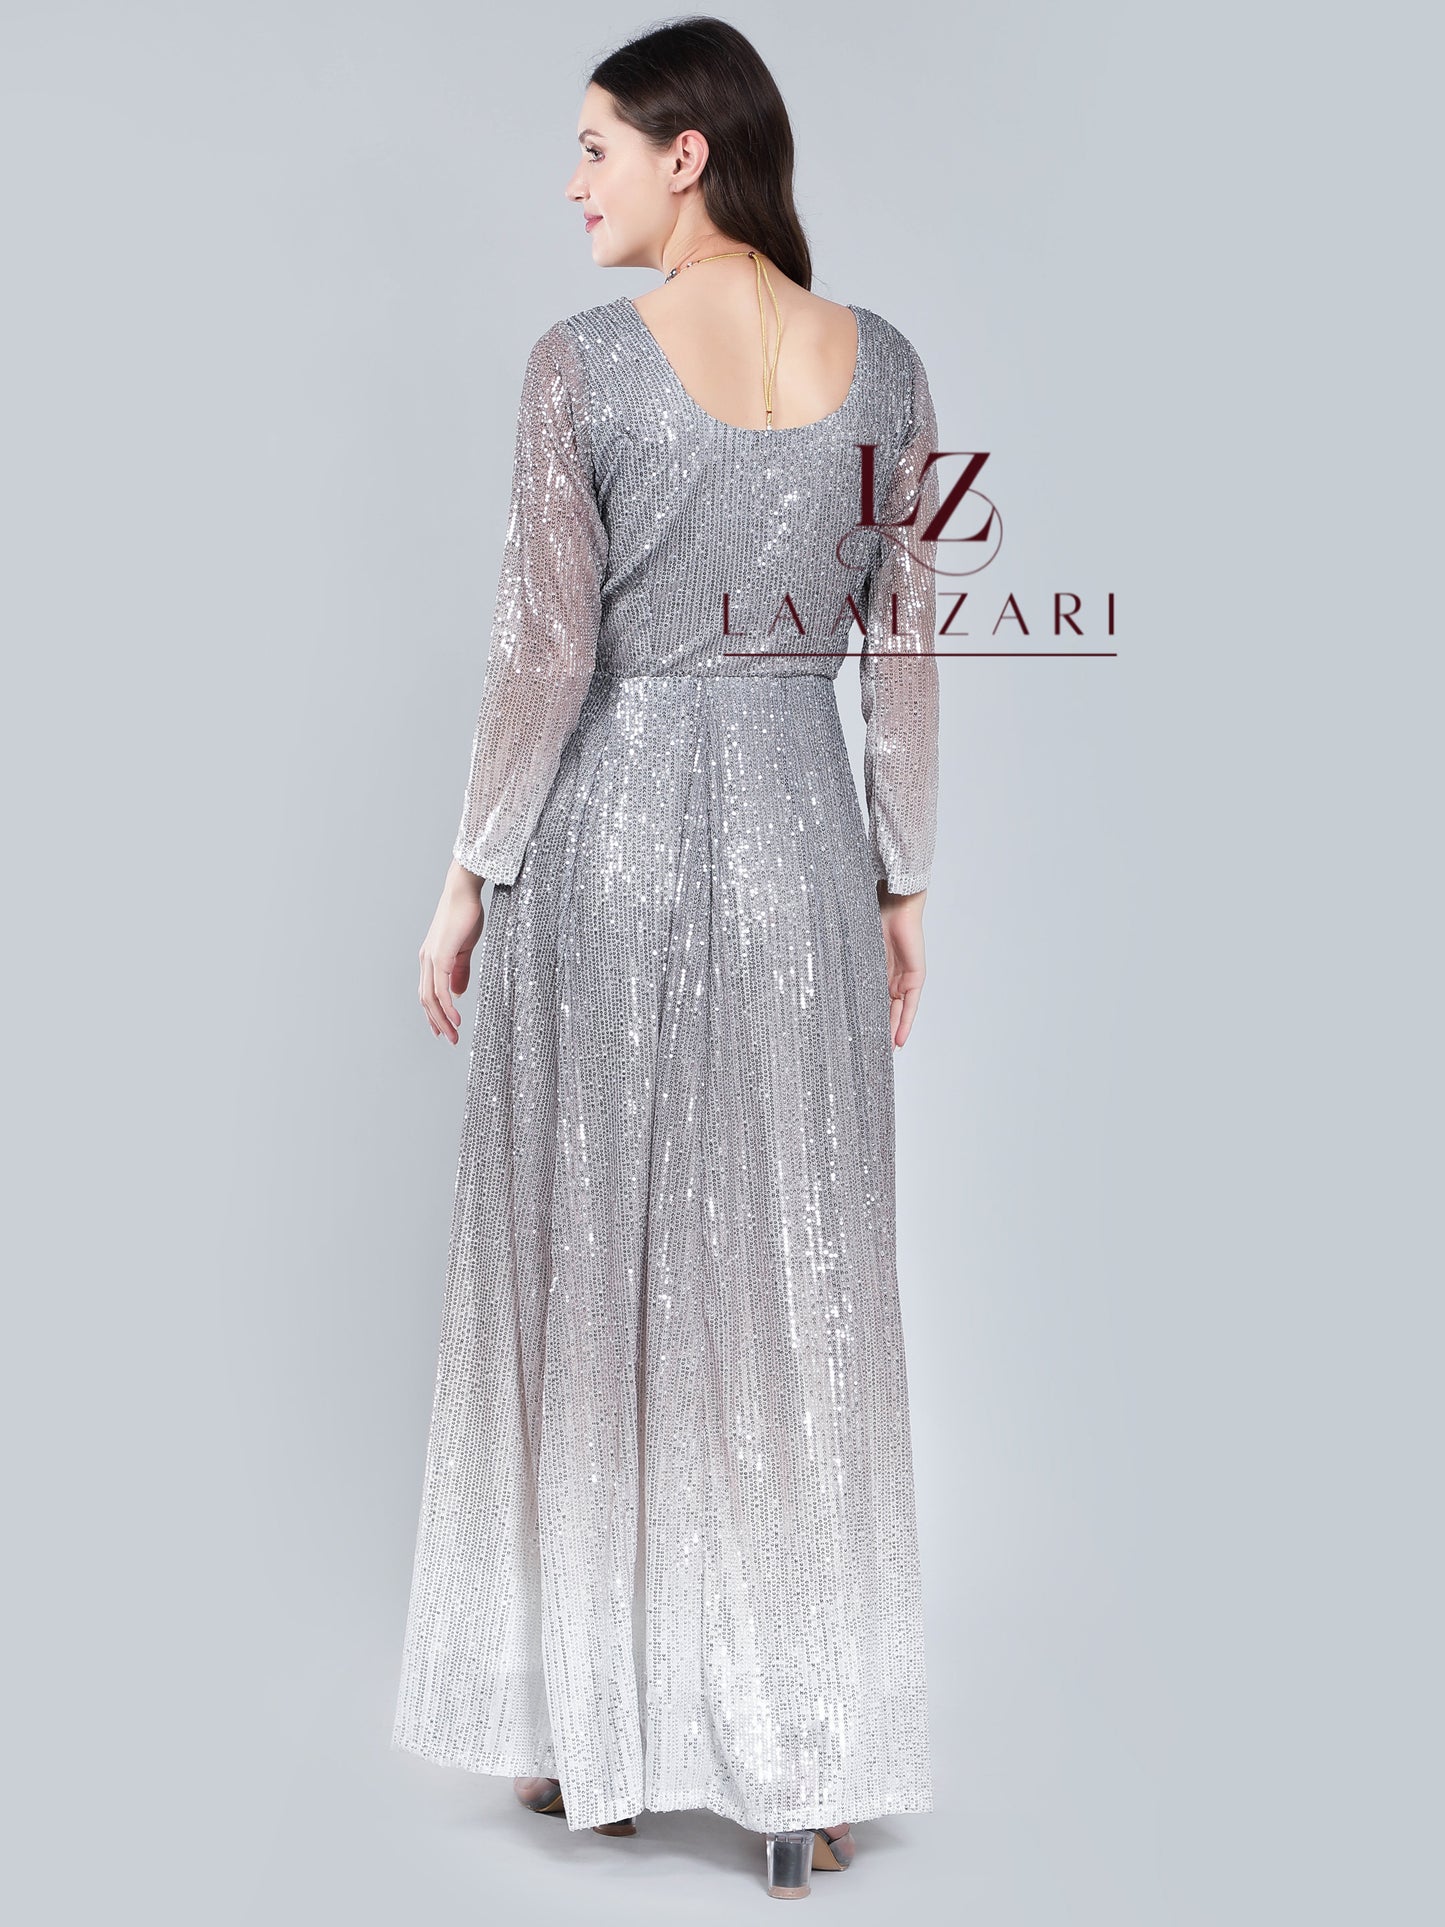 Grey Affairs Gown